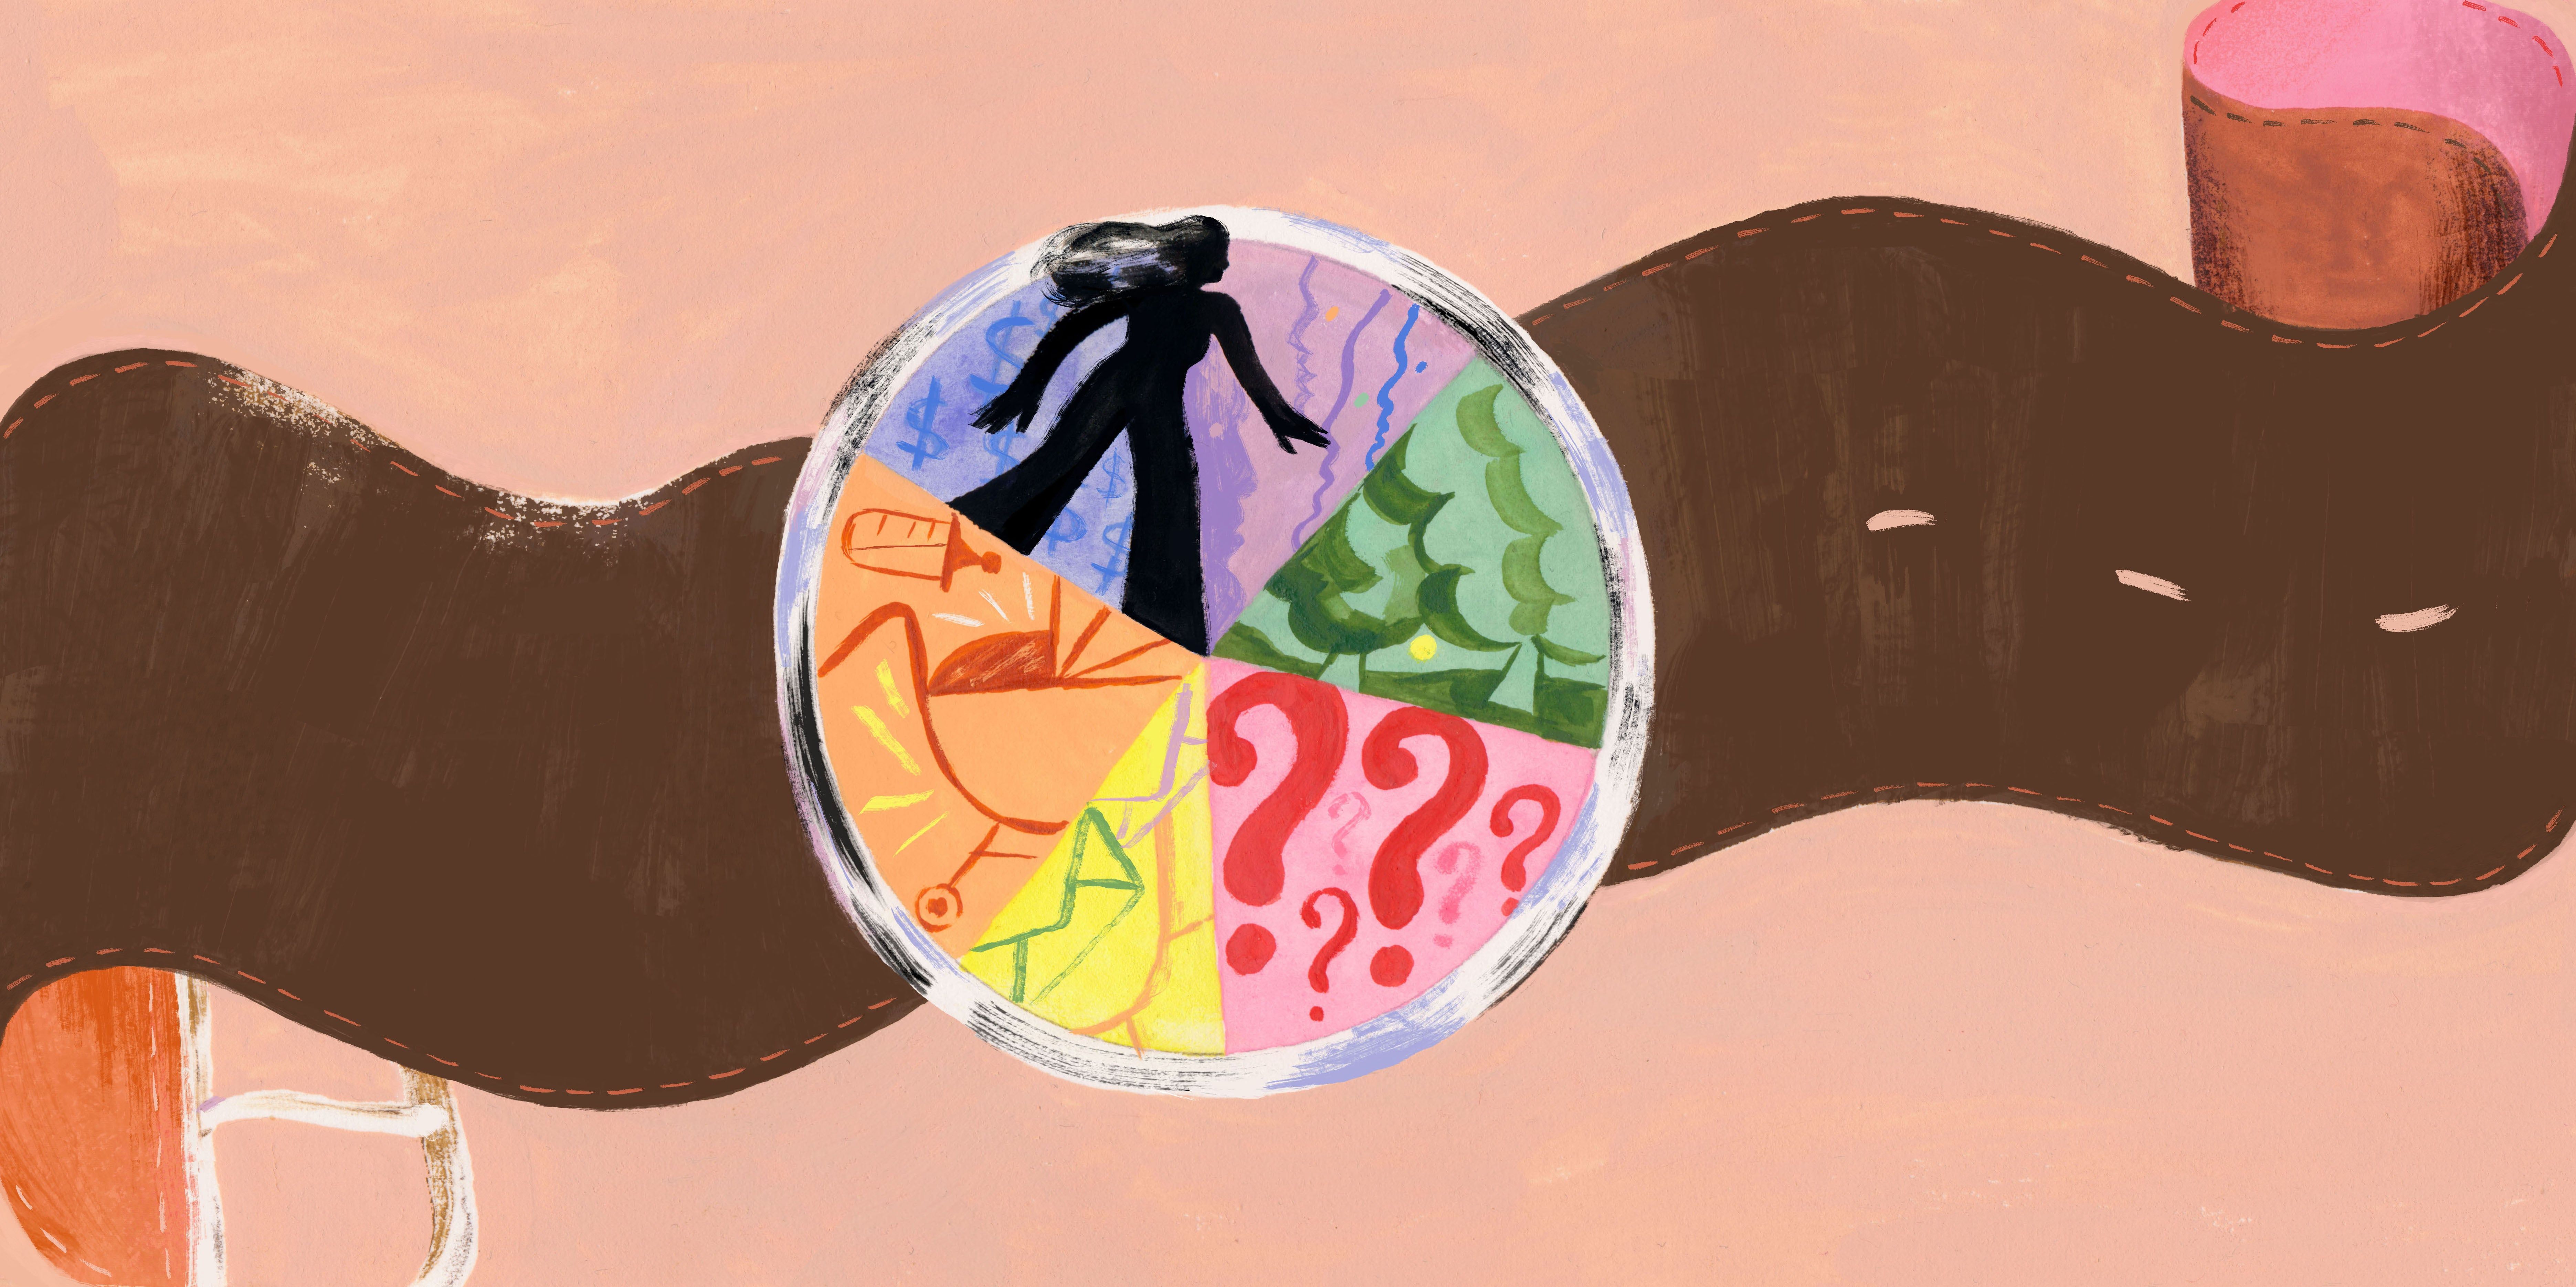 illustration of watch face with section dedicated to friends, family, and work to highlight time management